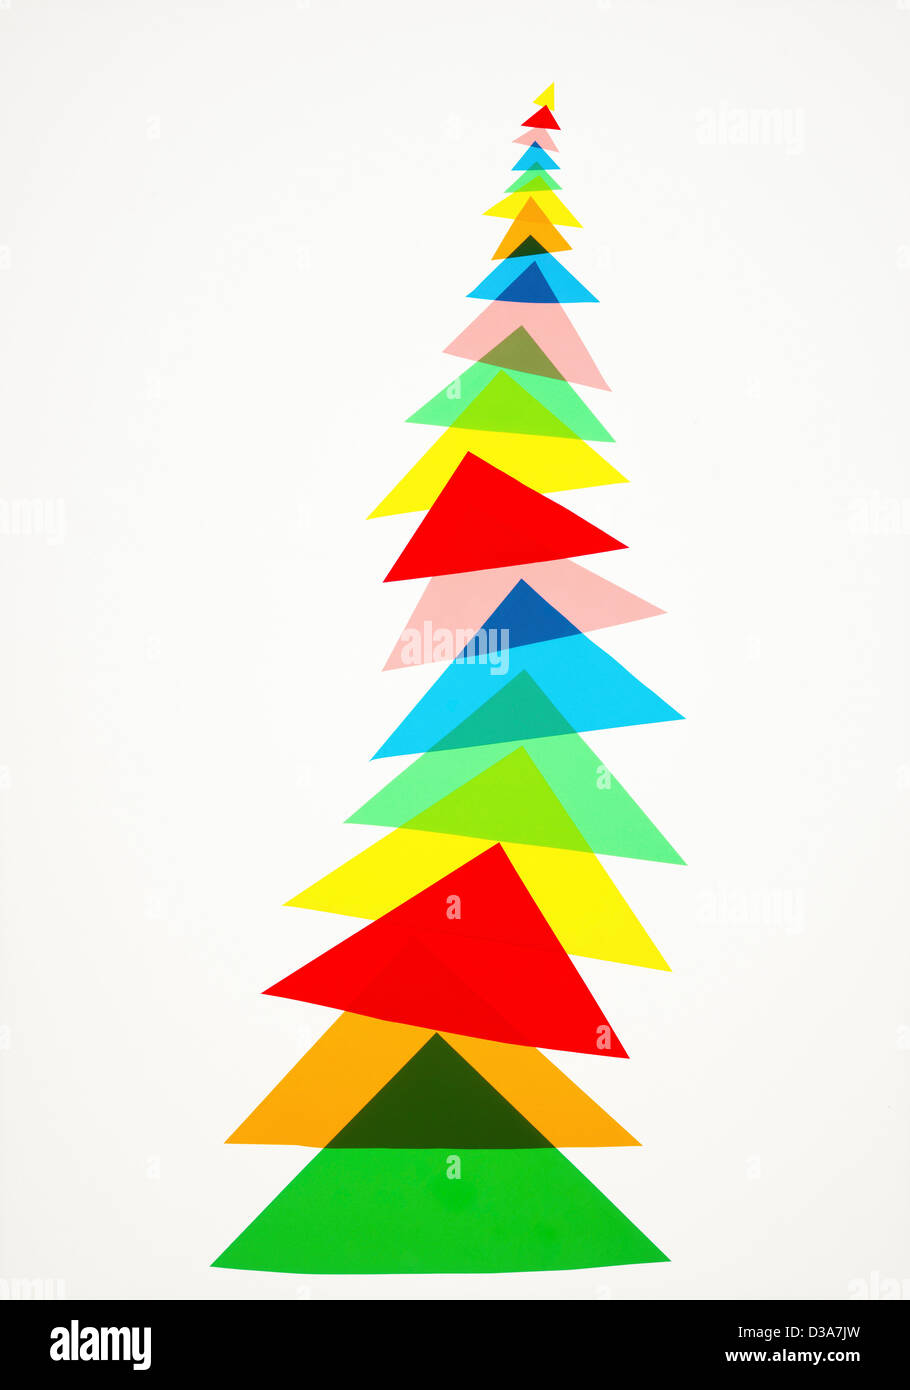 Illustration of colorful triangles Stock Photo